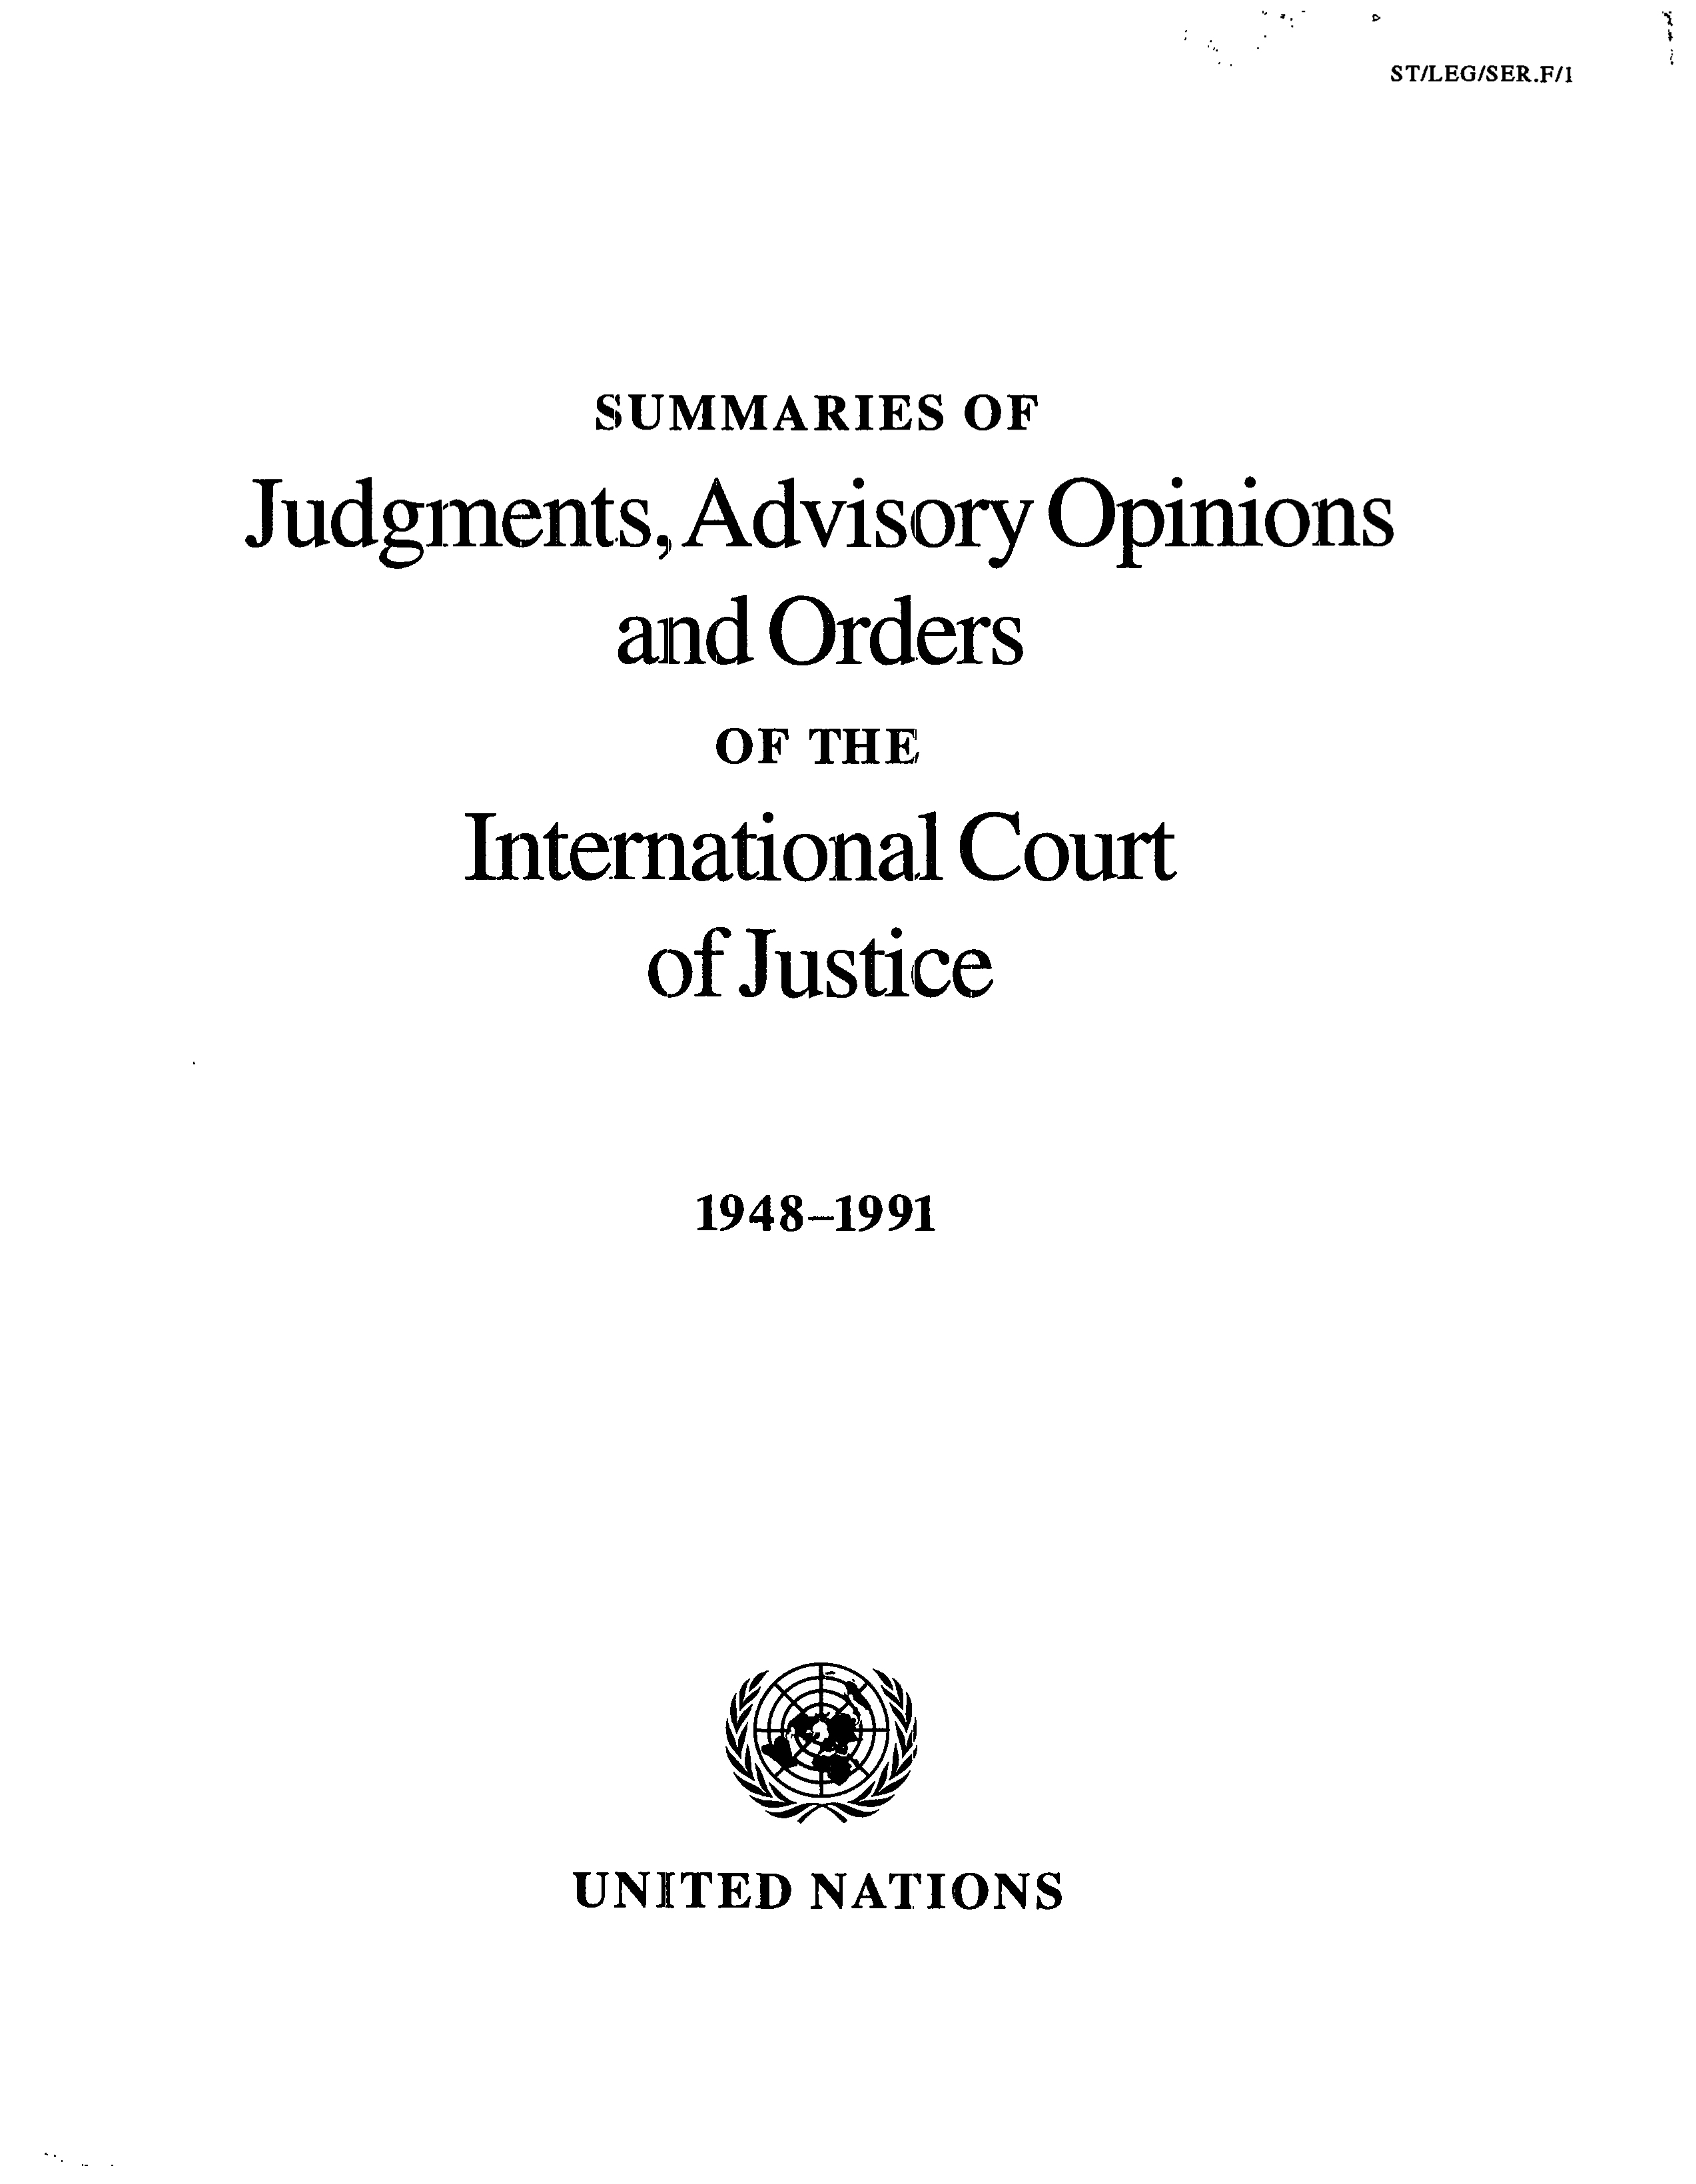 image of Summaries of Judgments, Advisory Opinions and Orders of the International Court of Justice 1948-1991